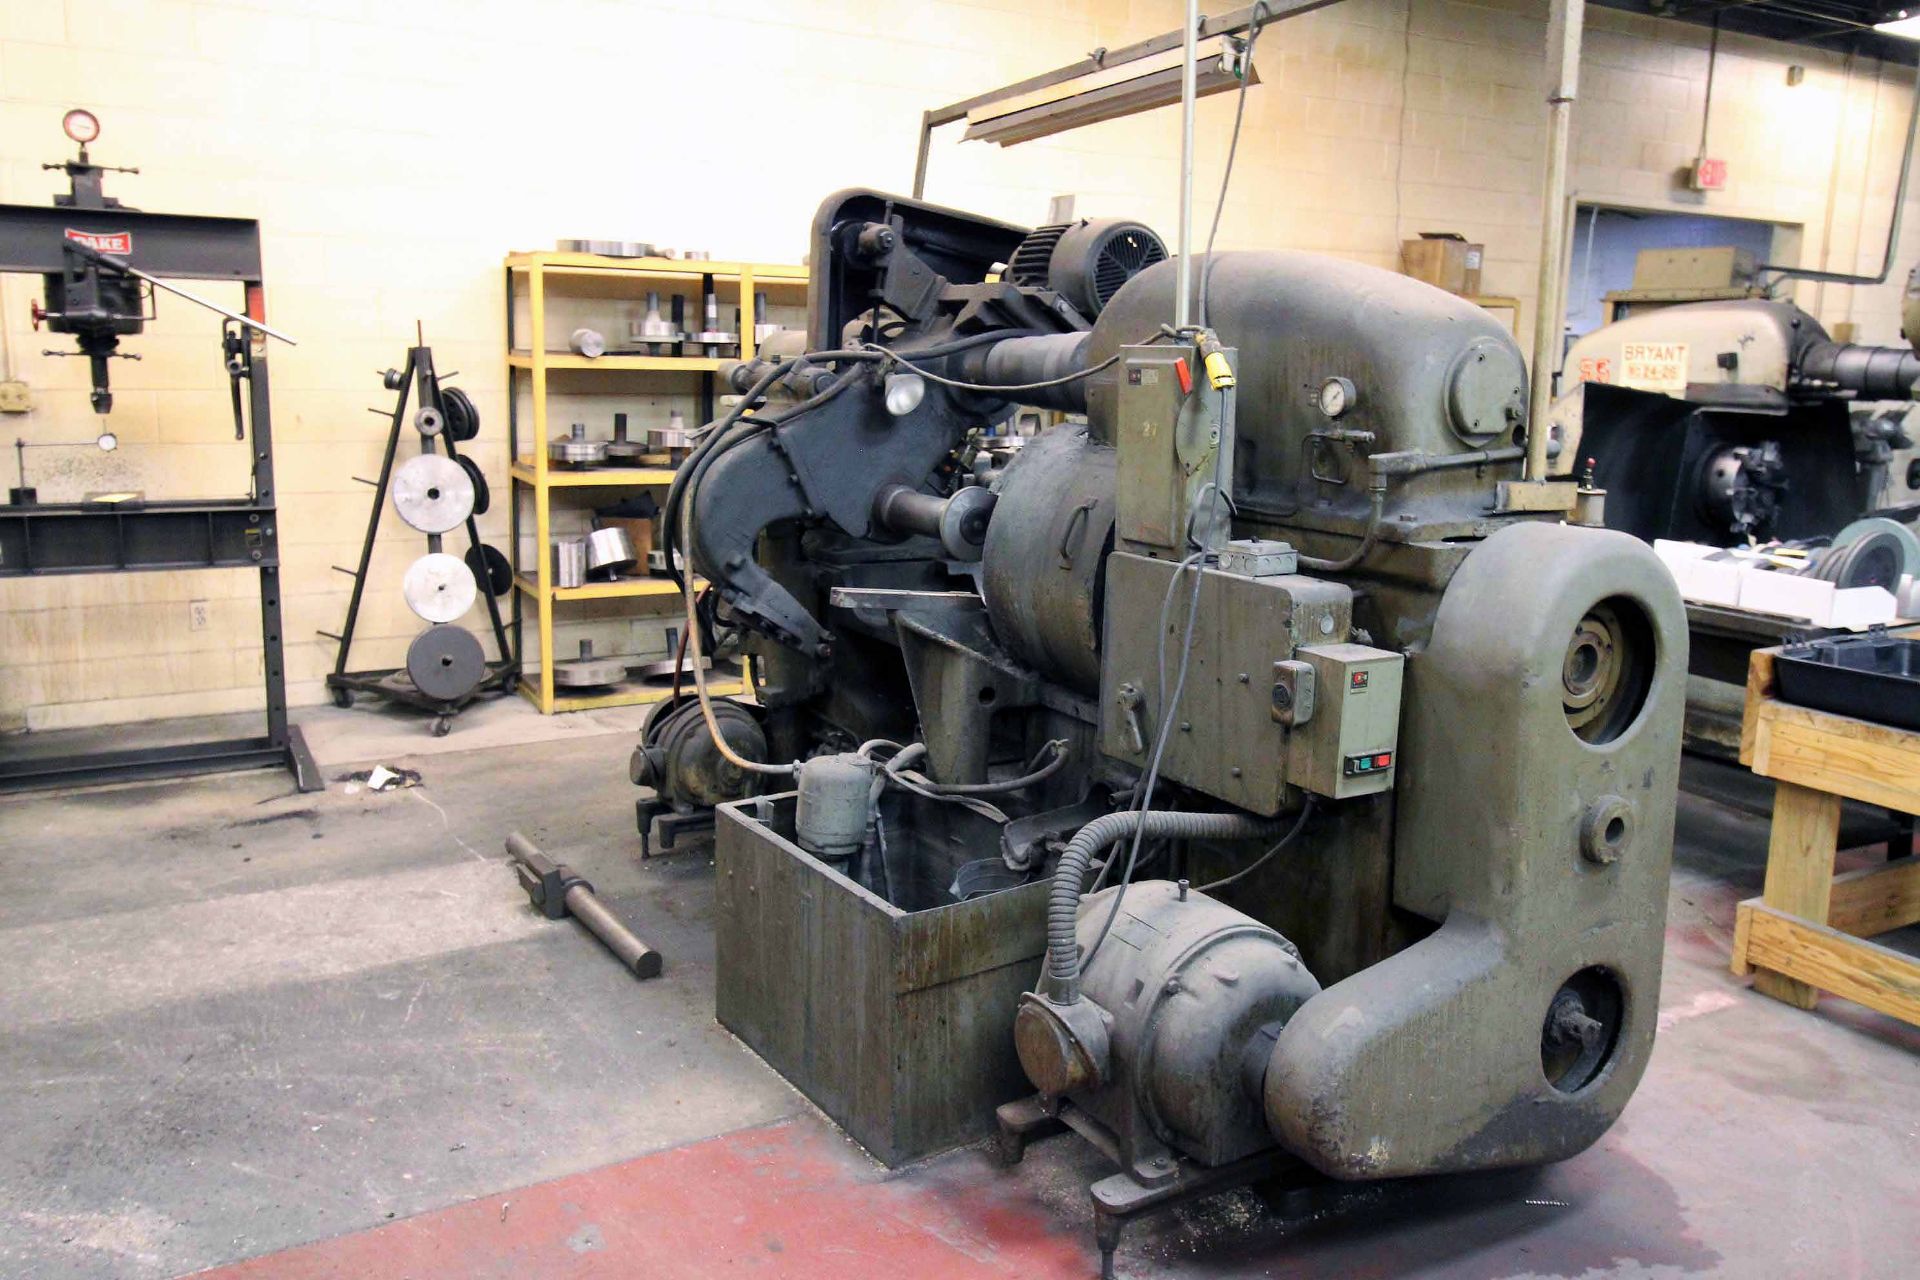 INTERNAL GRINDER, BRYANT NO. 24-26, 15 HP grinding spdl. drive, 18” dia. 6-jaw chuck, auto. - Image 4 of 7